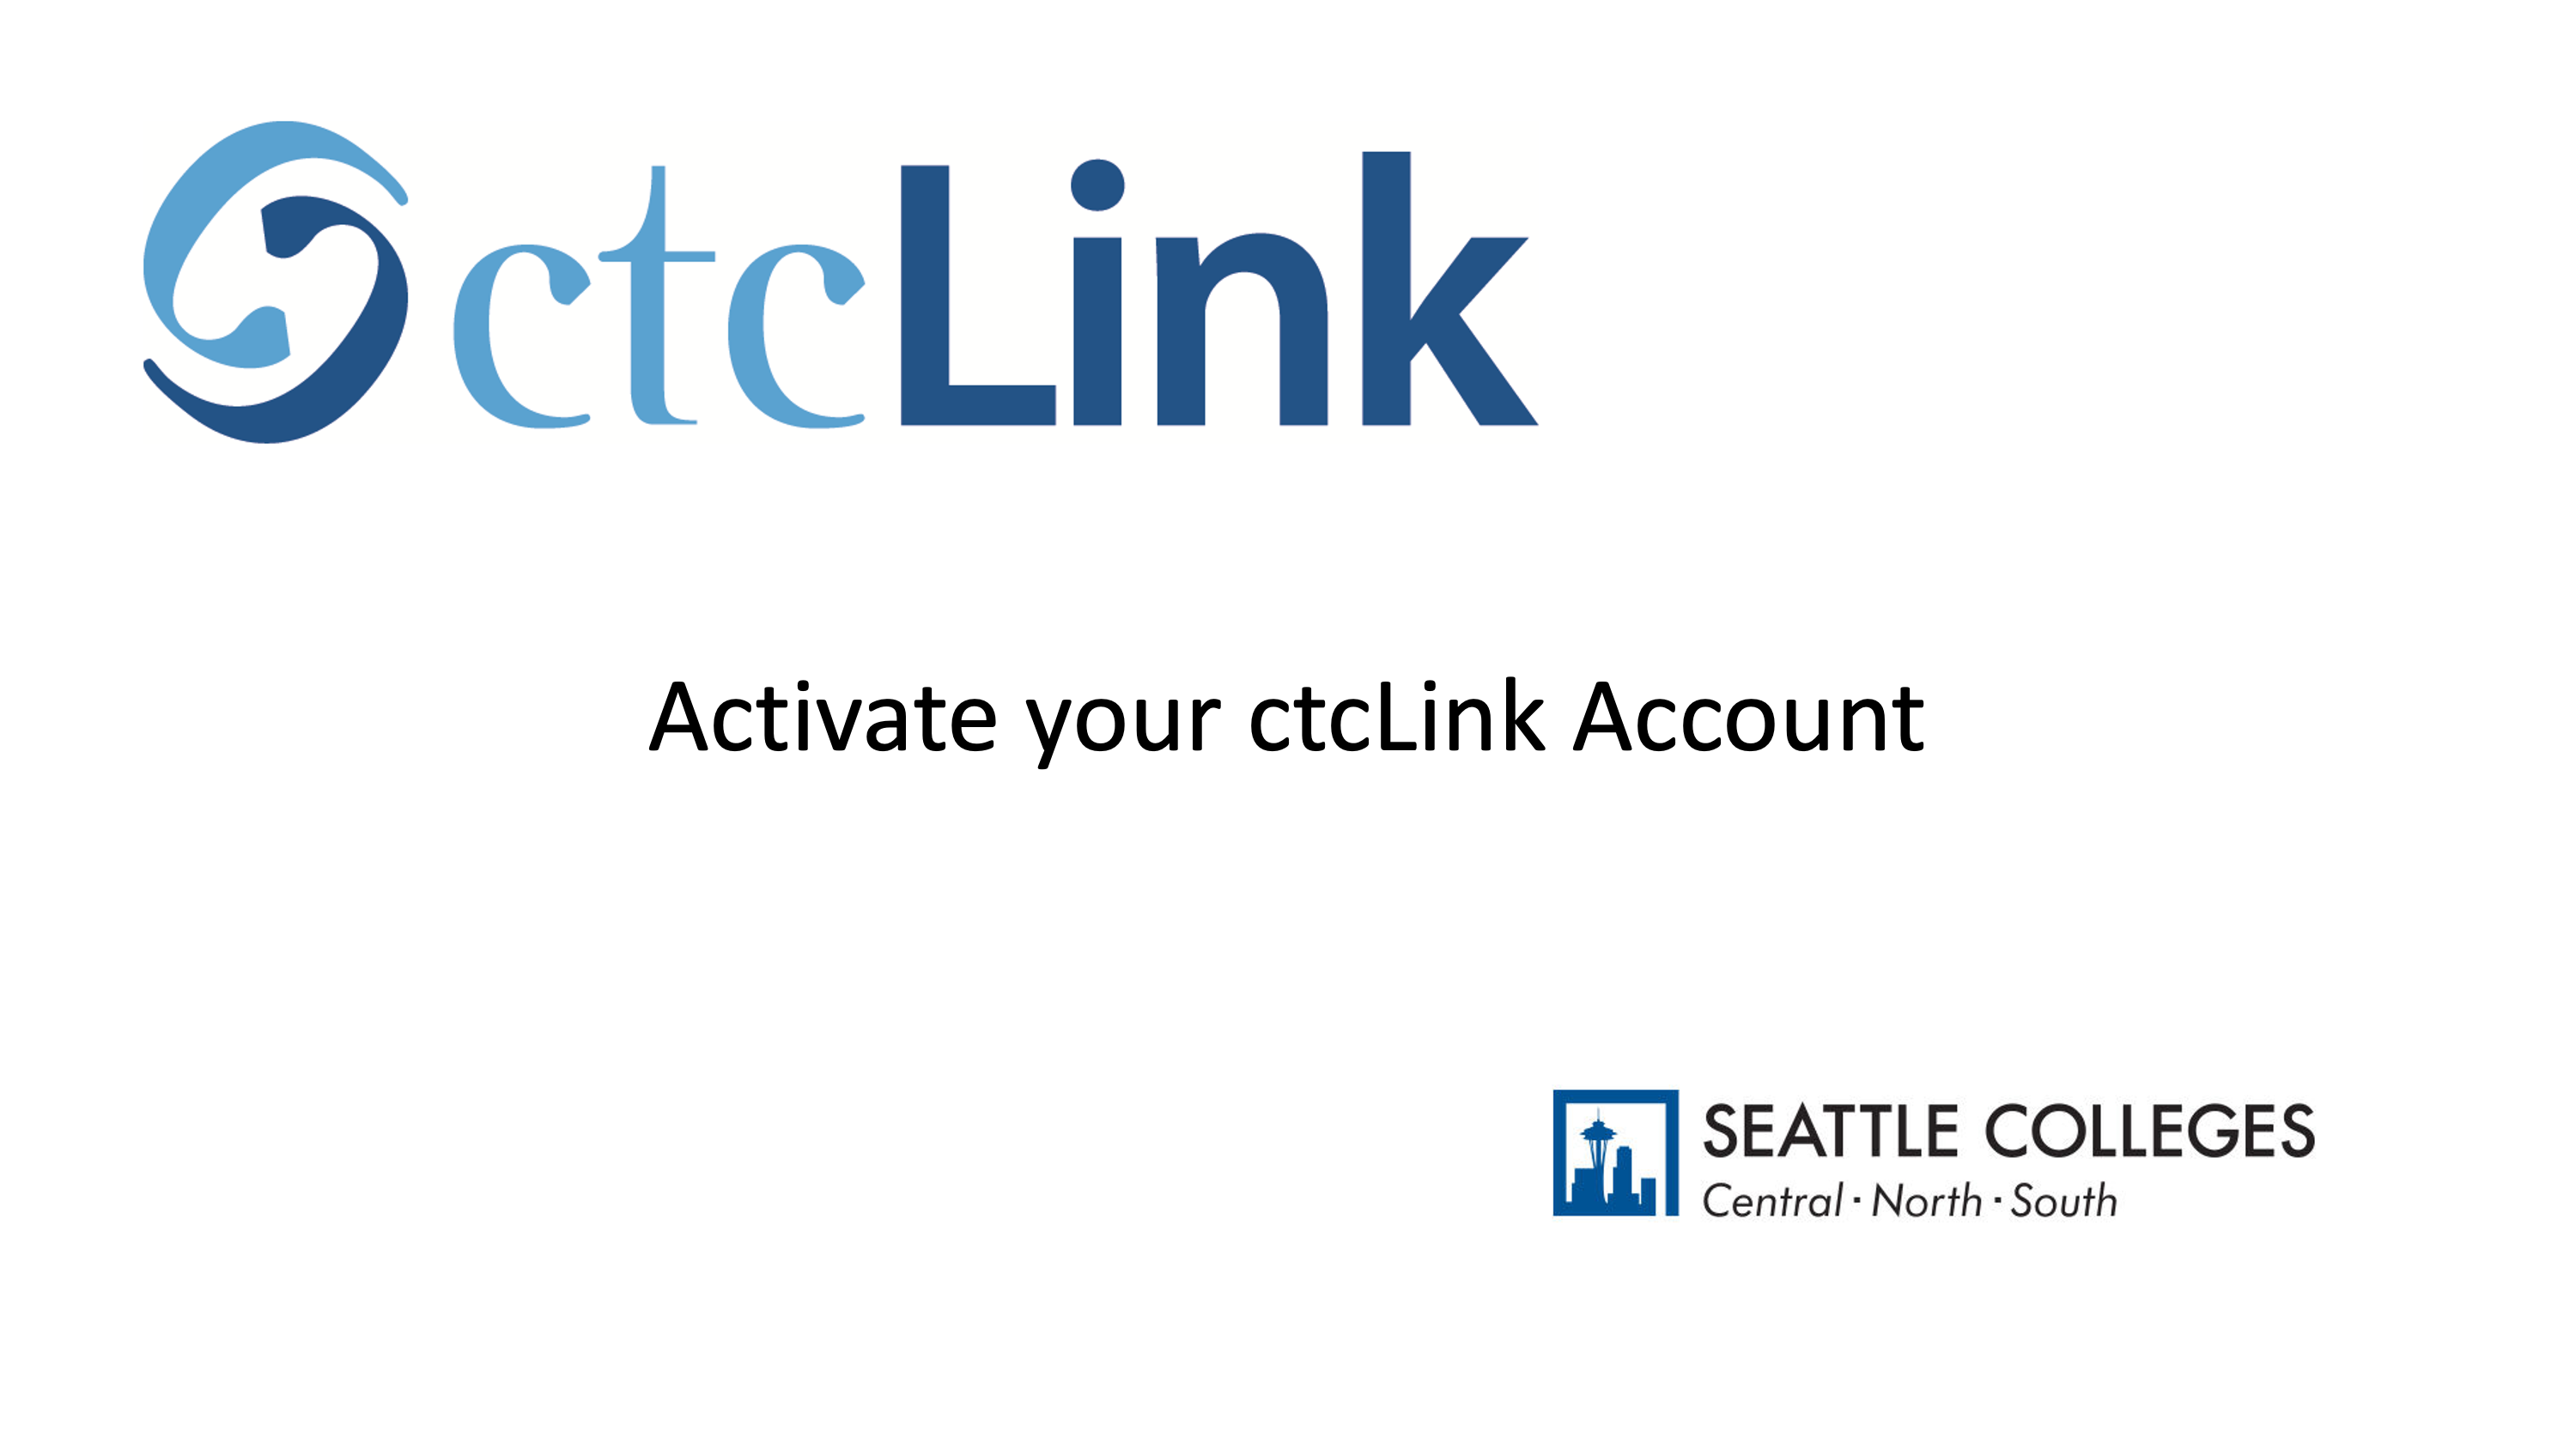 Activate your ctcLink Account for Seattle Colleges